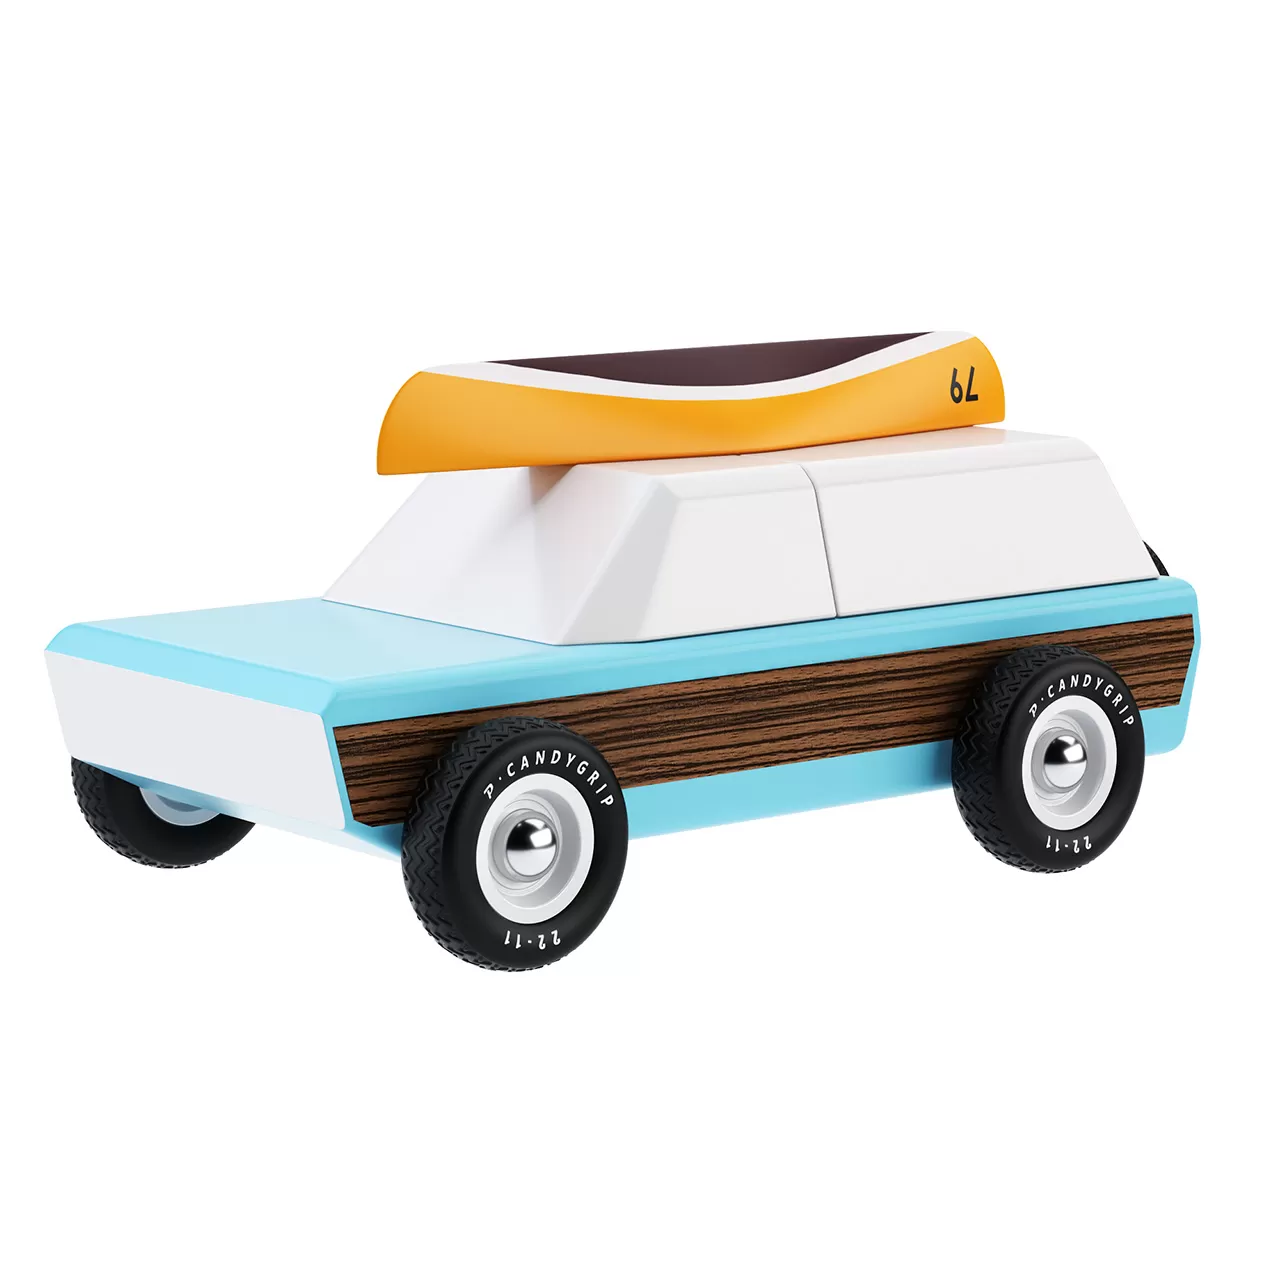 Kids – pioneer-classic-toy-car-by-candylab